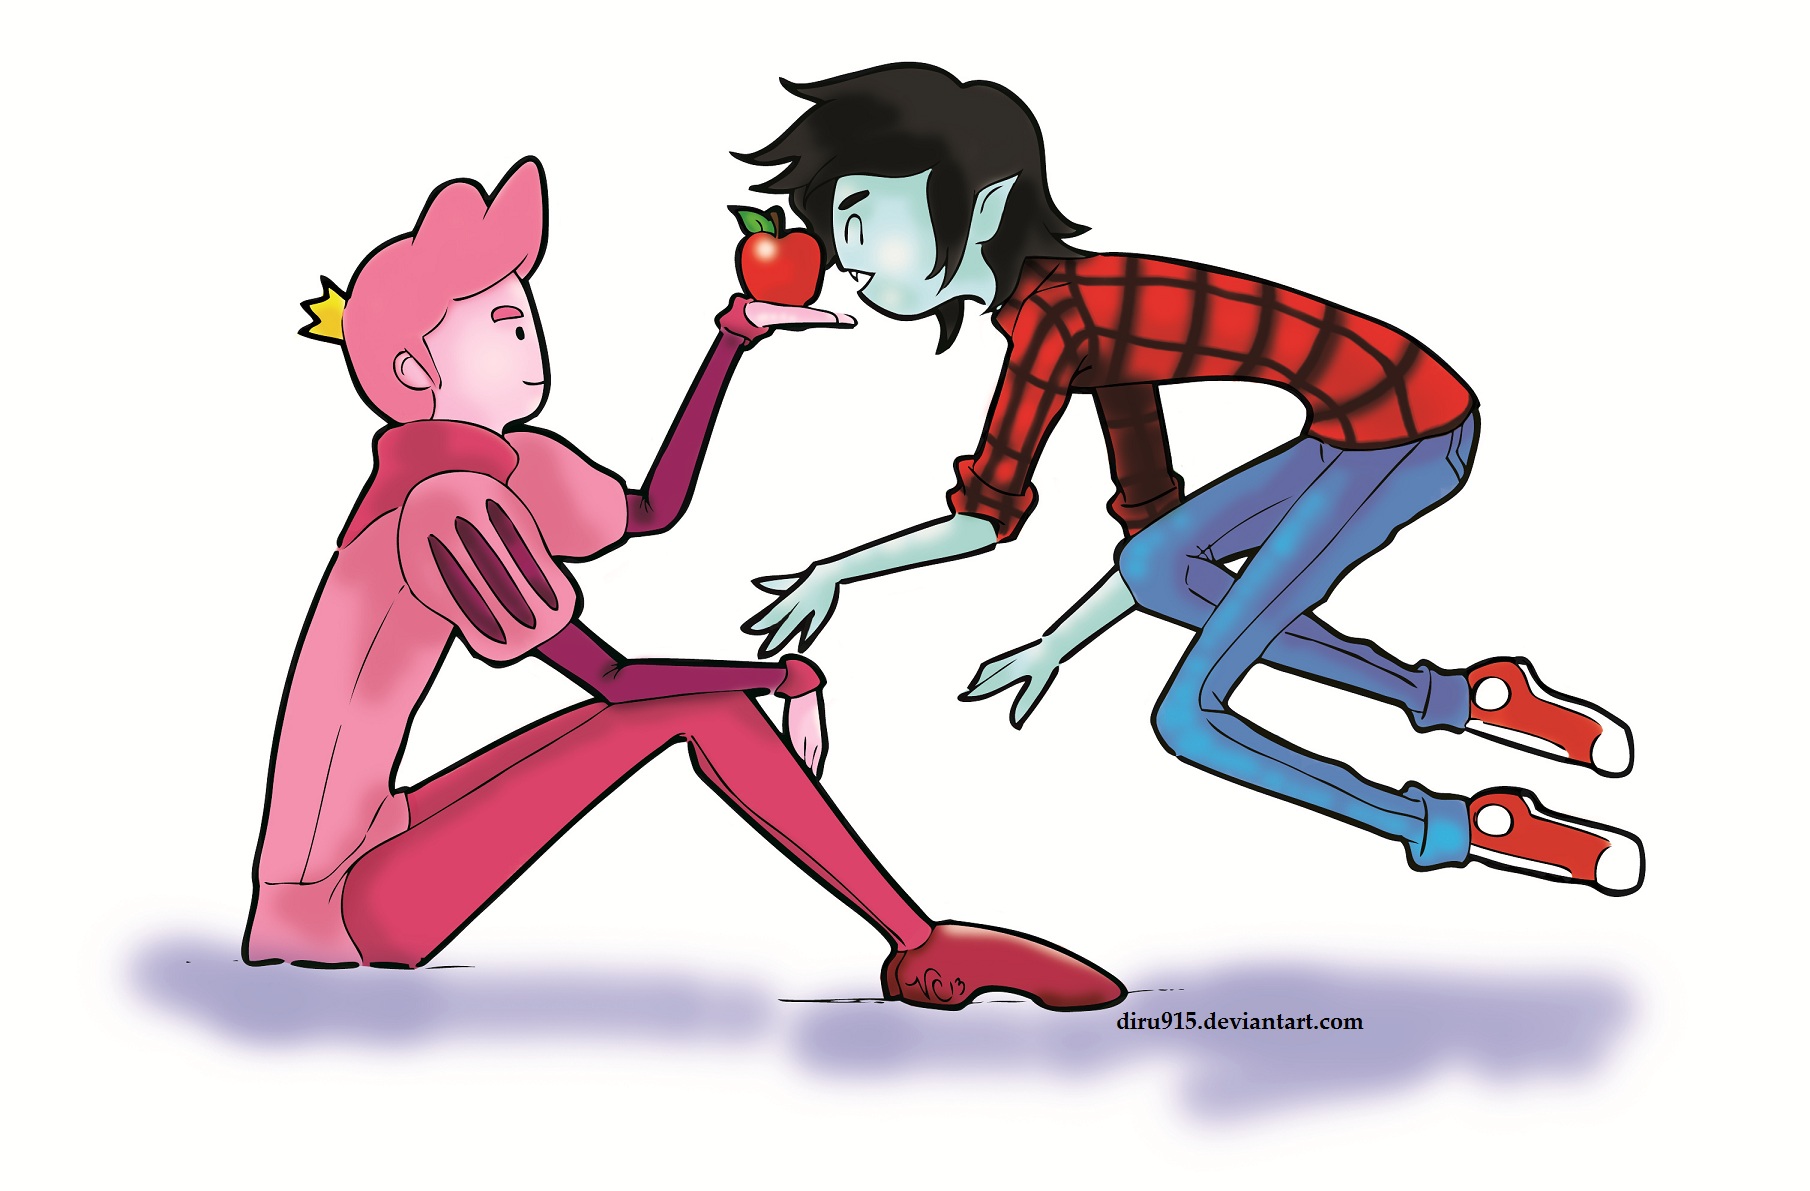 Prince Gumball and Marshall Lee - SNACK TIME! by diru915 on DeviantArt